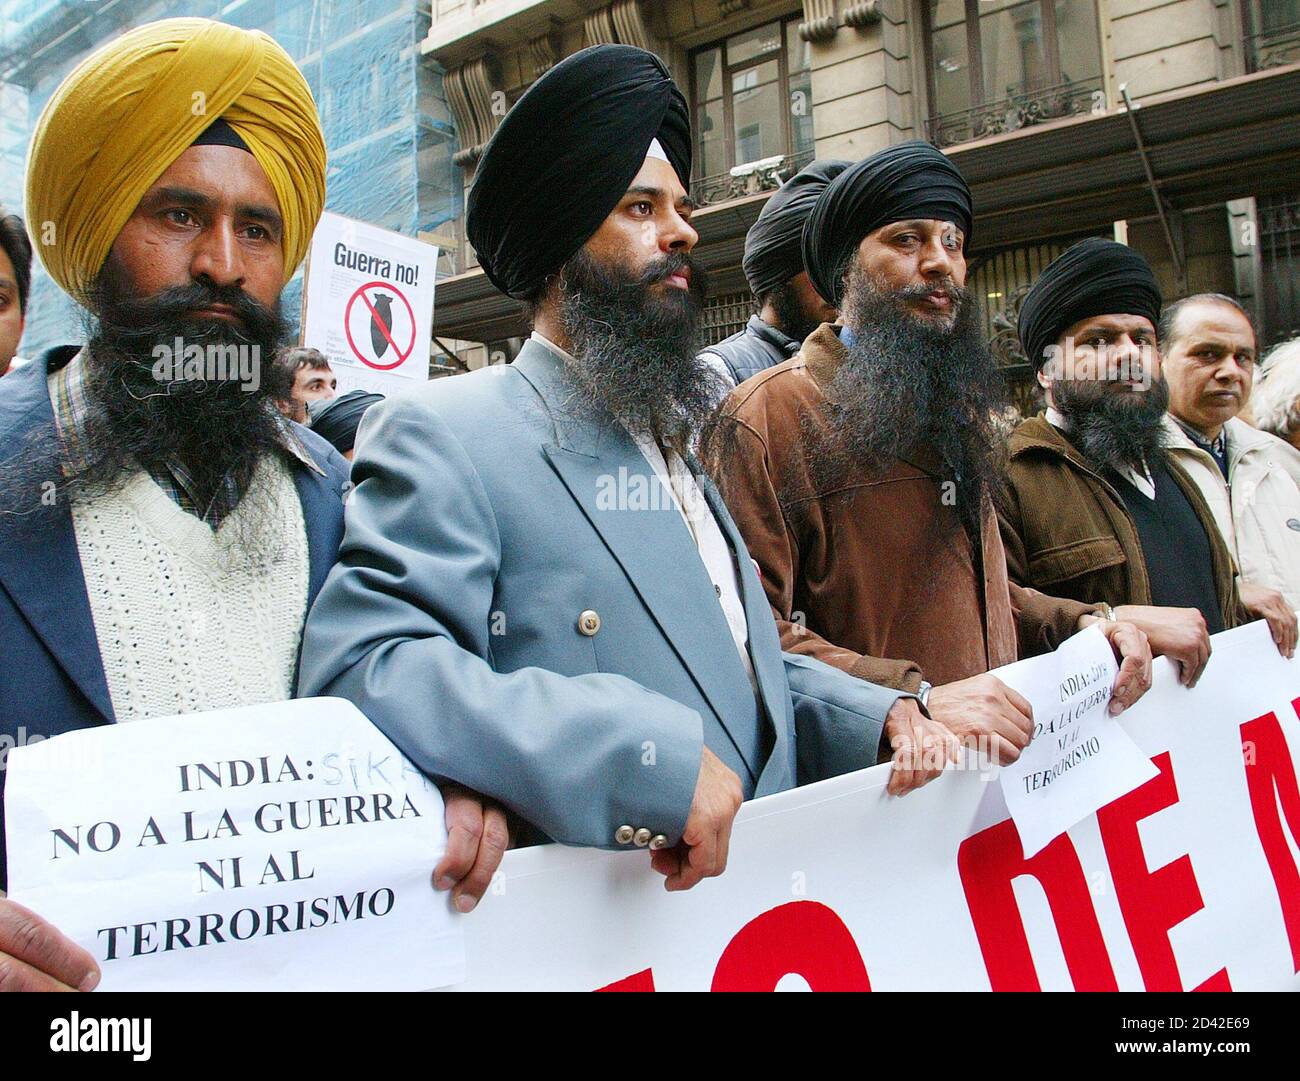 Members of the Indian community living in Catalonia take part in an anti-war march in central Barcelona on the first anniversary of the start of war in Iraq, March 20, 2004. Worldwide protests marked the anniversary of the war in Iraq on Saturday as tens of thousands demanded the U.S.-led coalition pull its troops out of the country scarred by a year of war and insurrection. REUTERS/Victor Fraile  GN/CRB Stock Photo